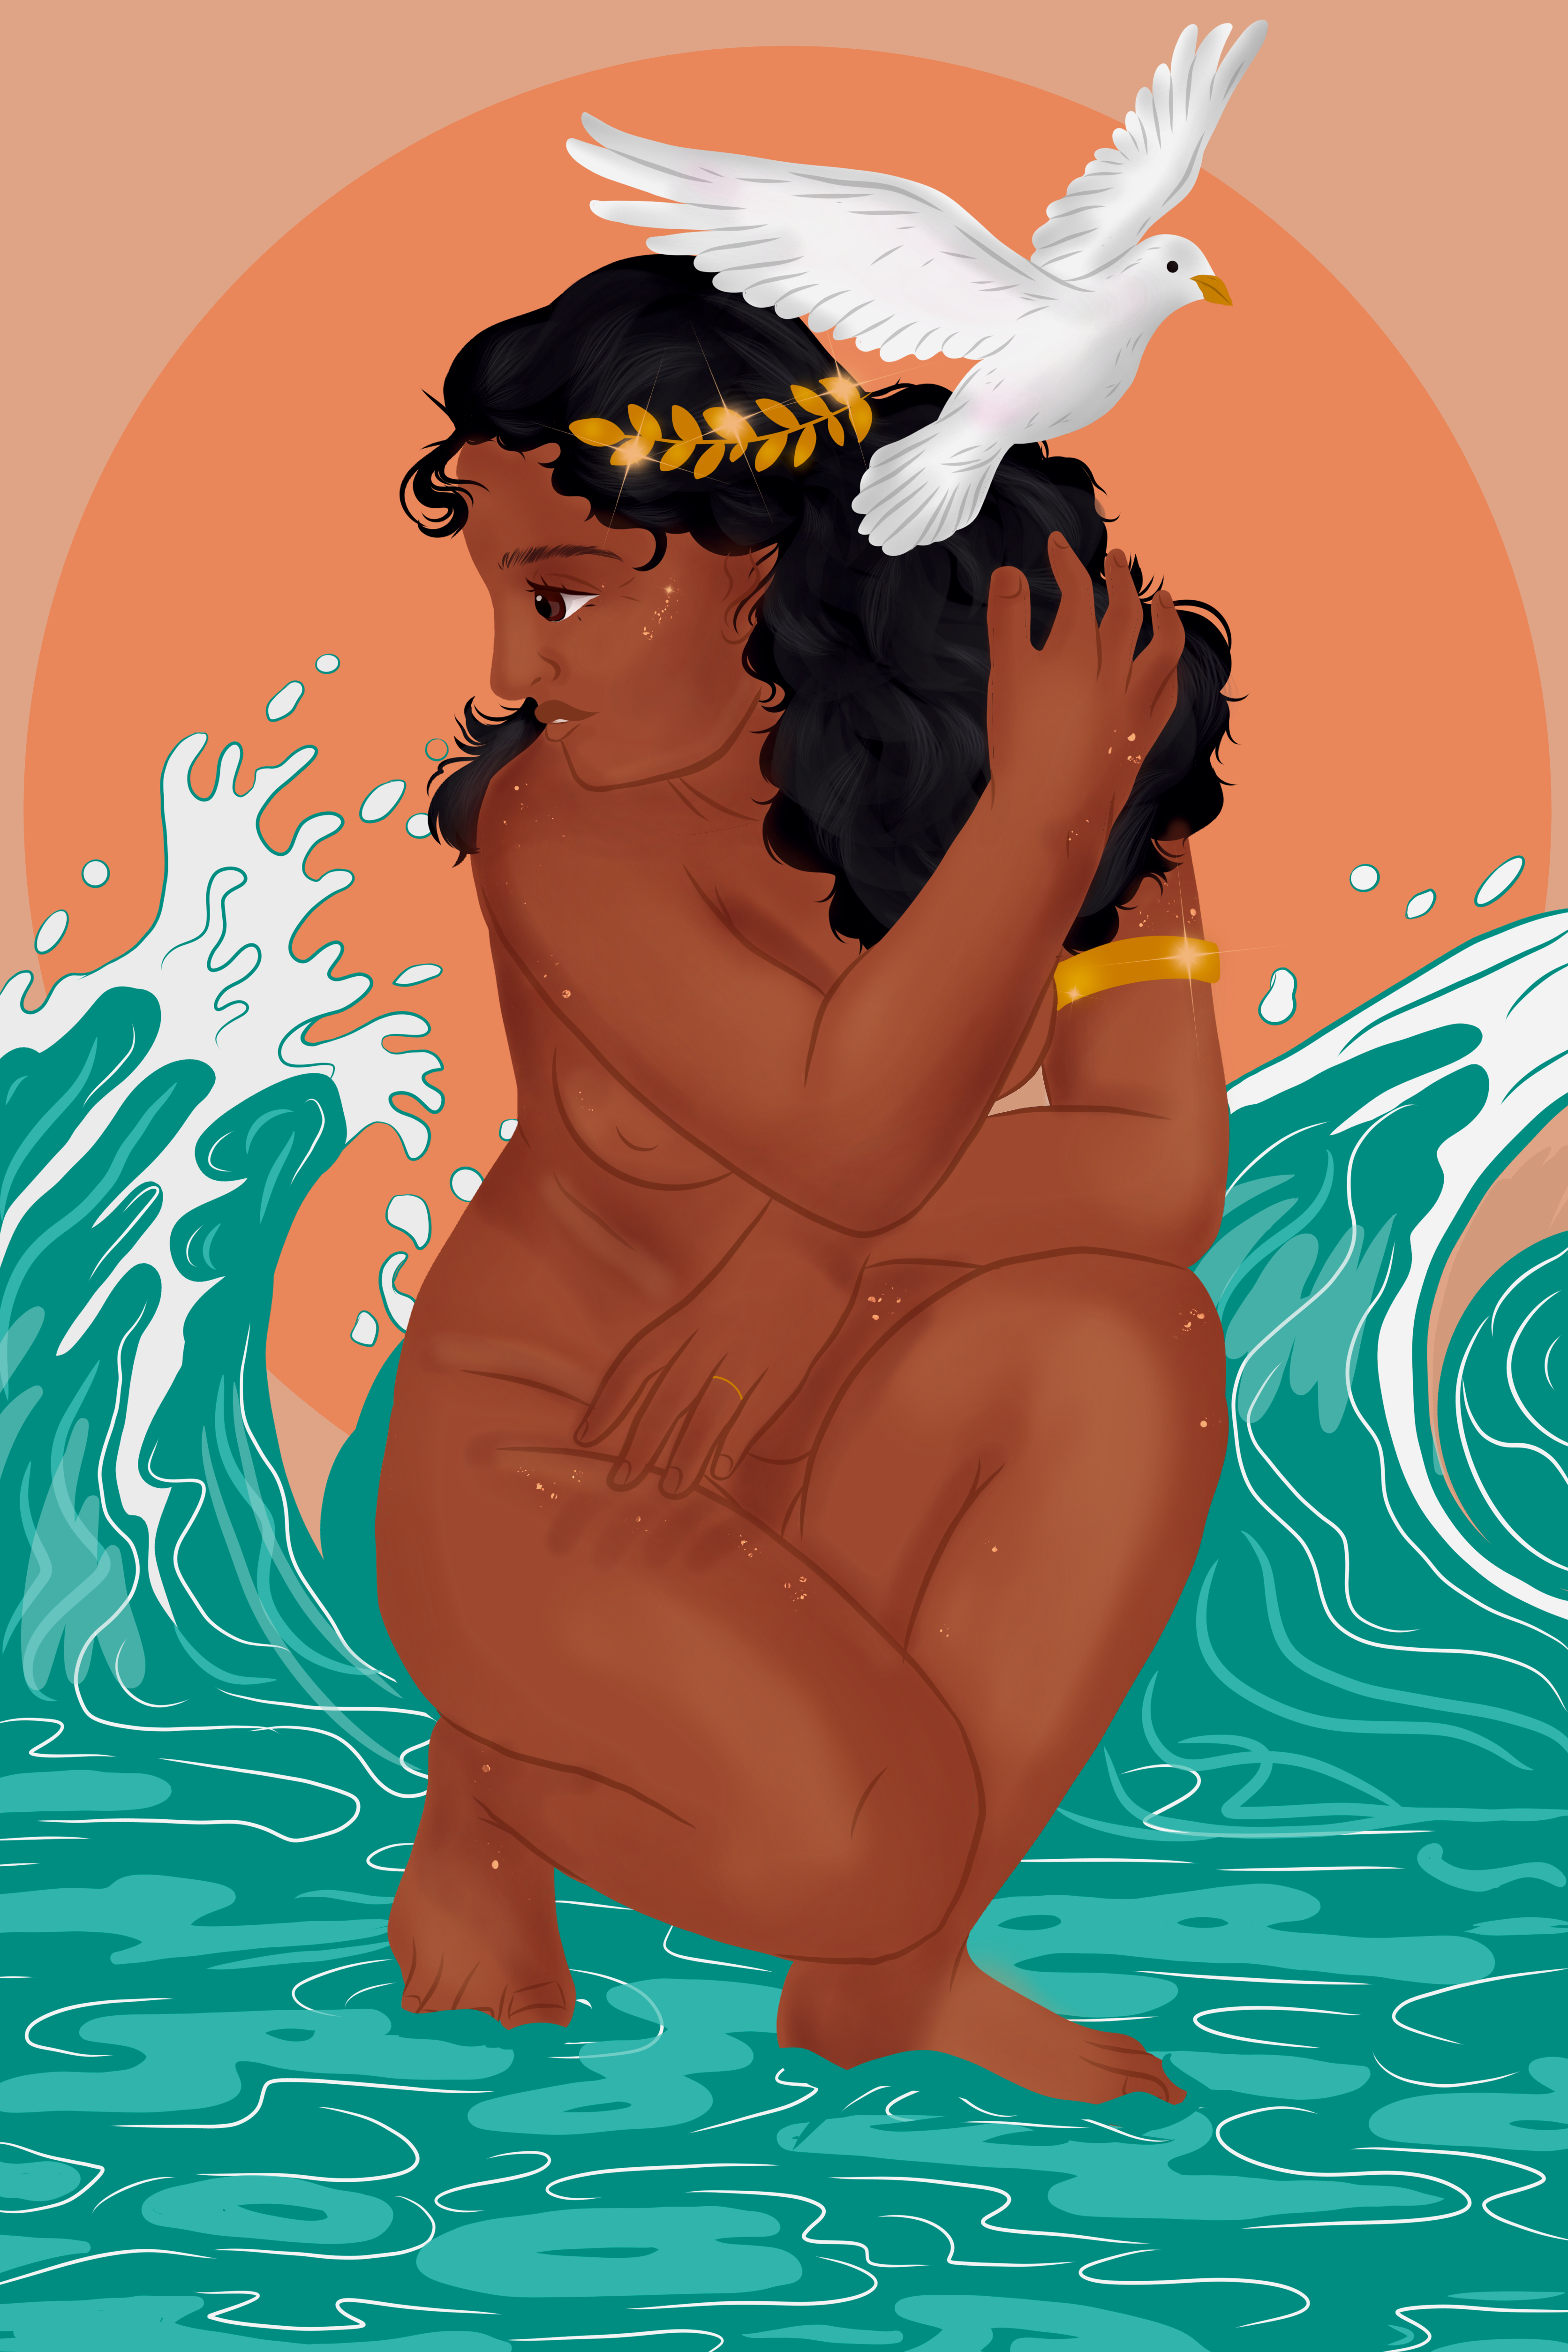 An image of Aphrodite by artist Brittany Beverung